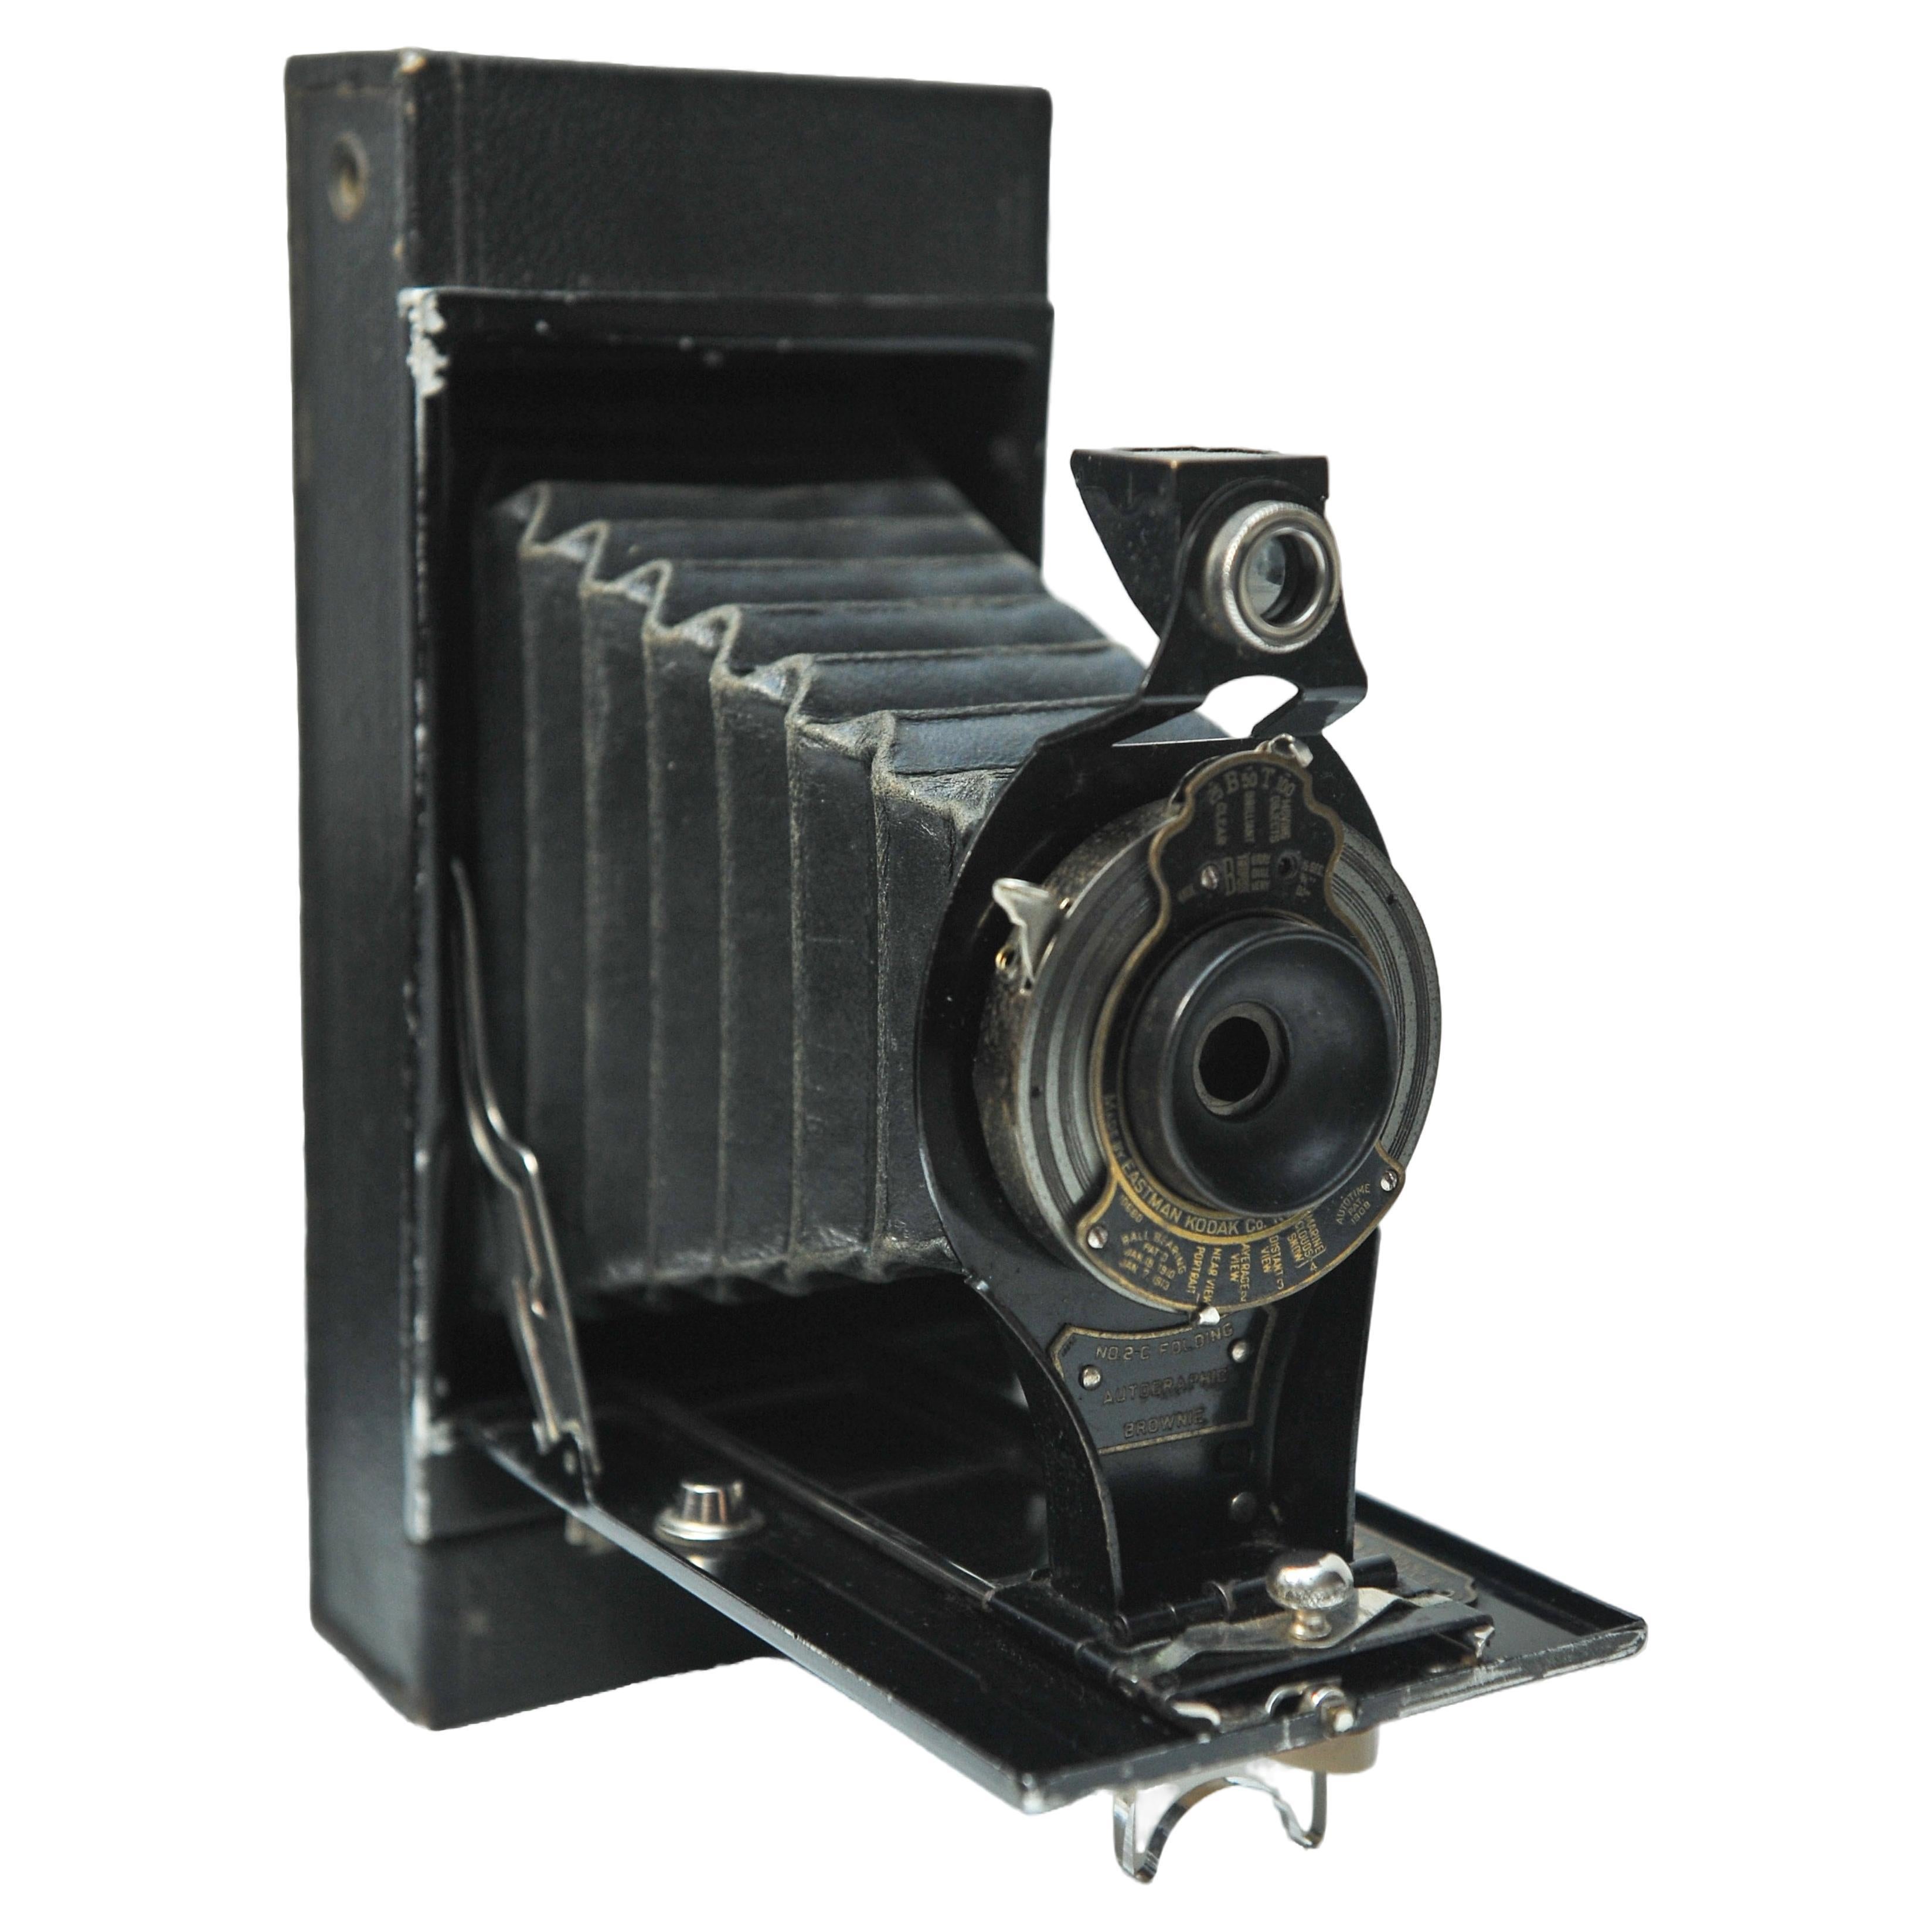 Eastman Kodak Co No. 2C Folding Autographic Brownie Folding Below Camera In Fair Condition For Sale In High Wycombe, GB